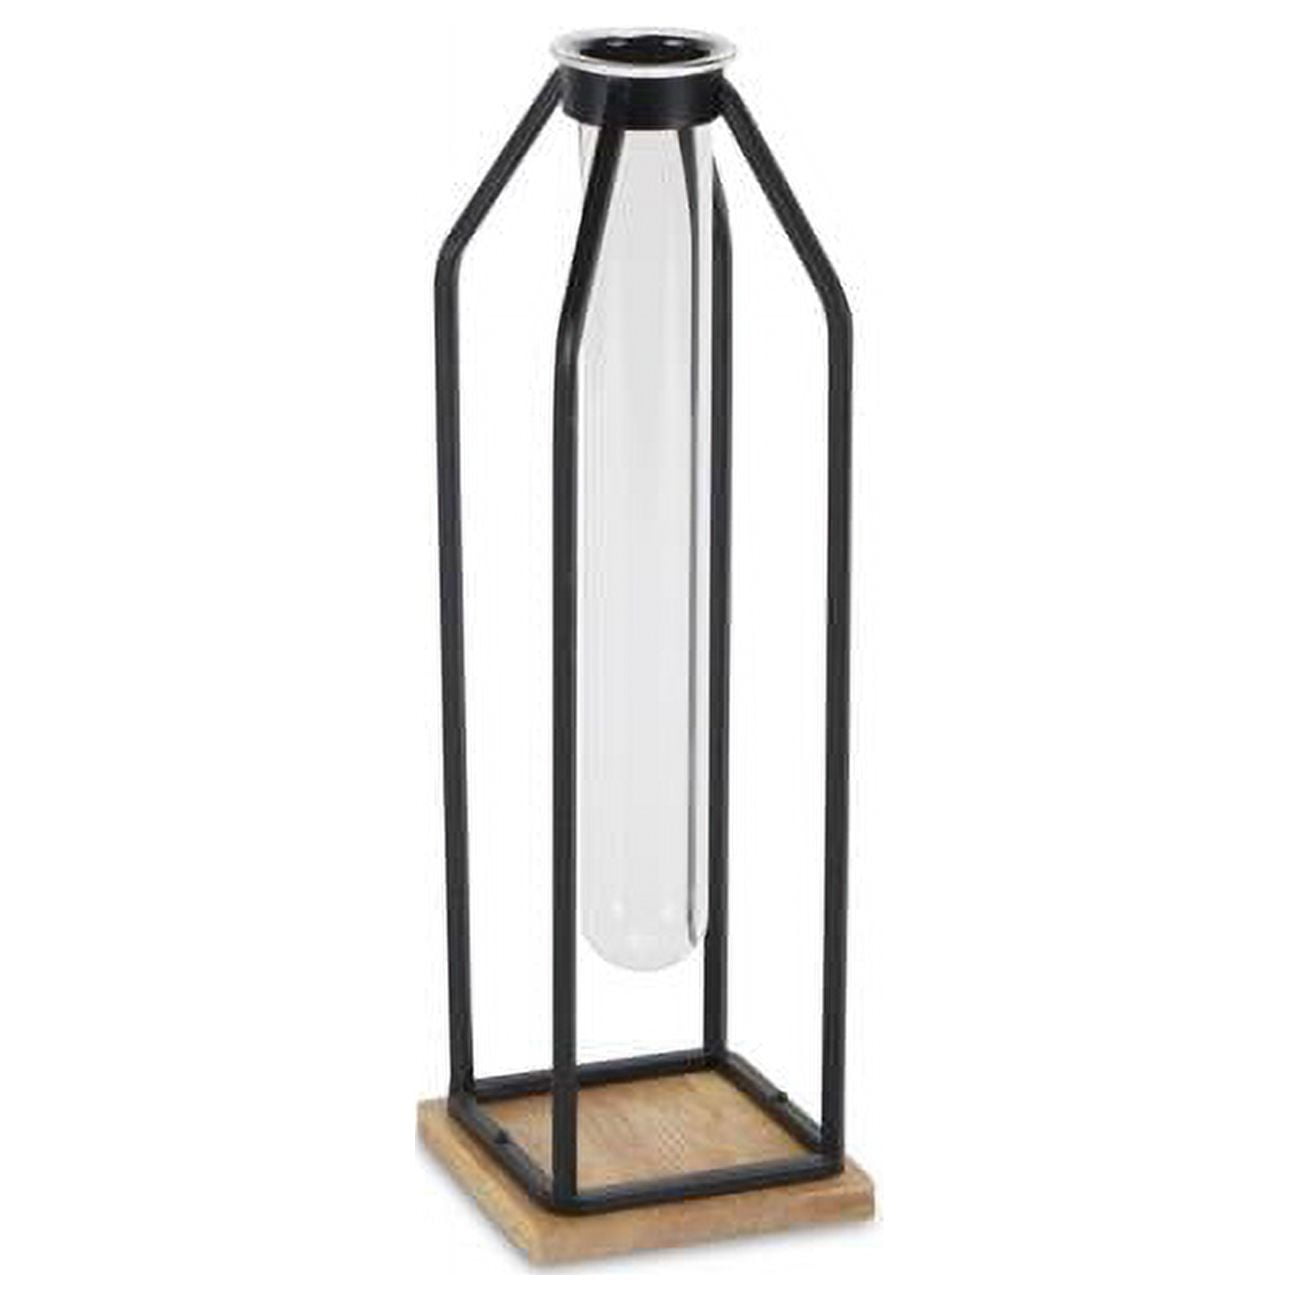 5483l-bk Tall Metal Stand With Glass Tube, Black